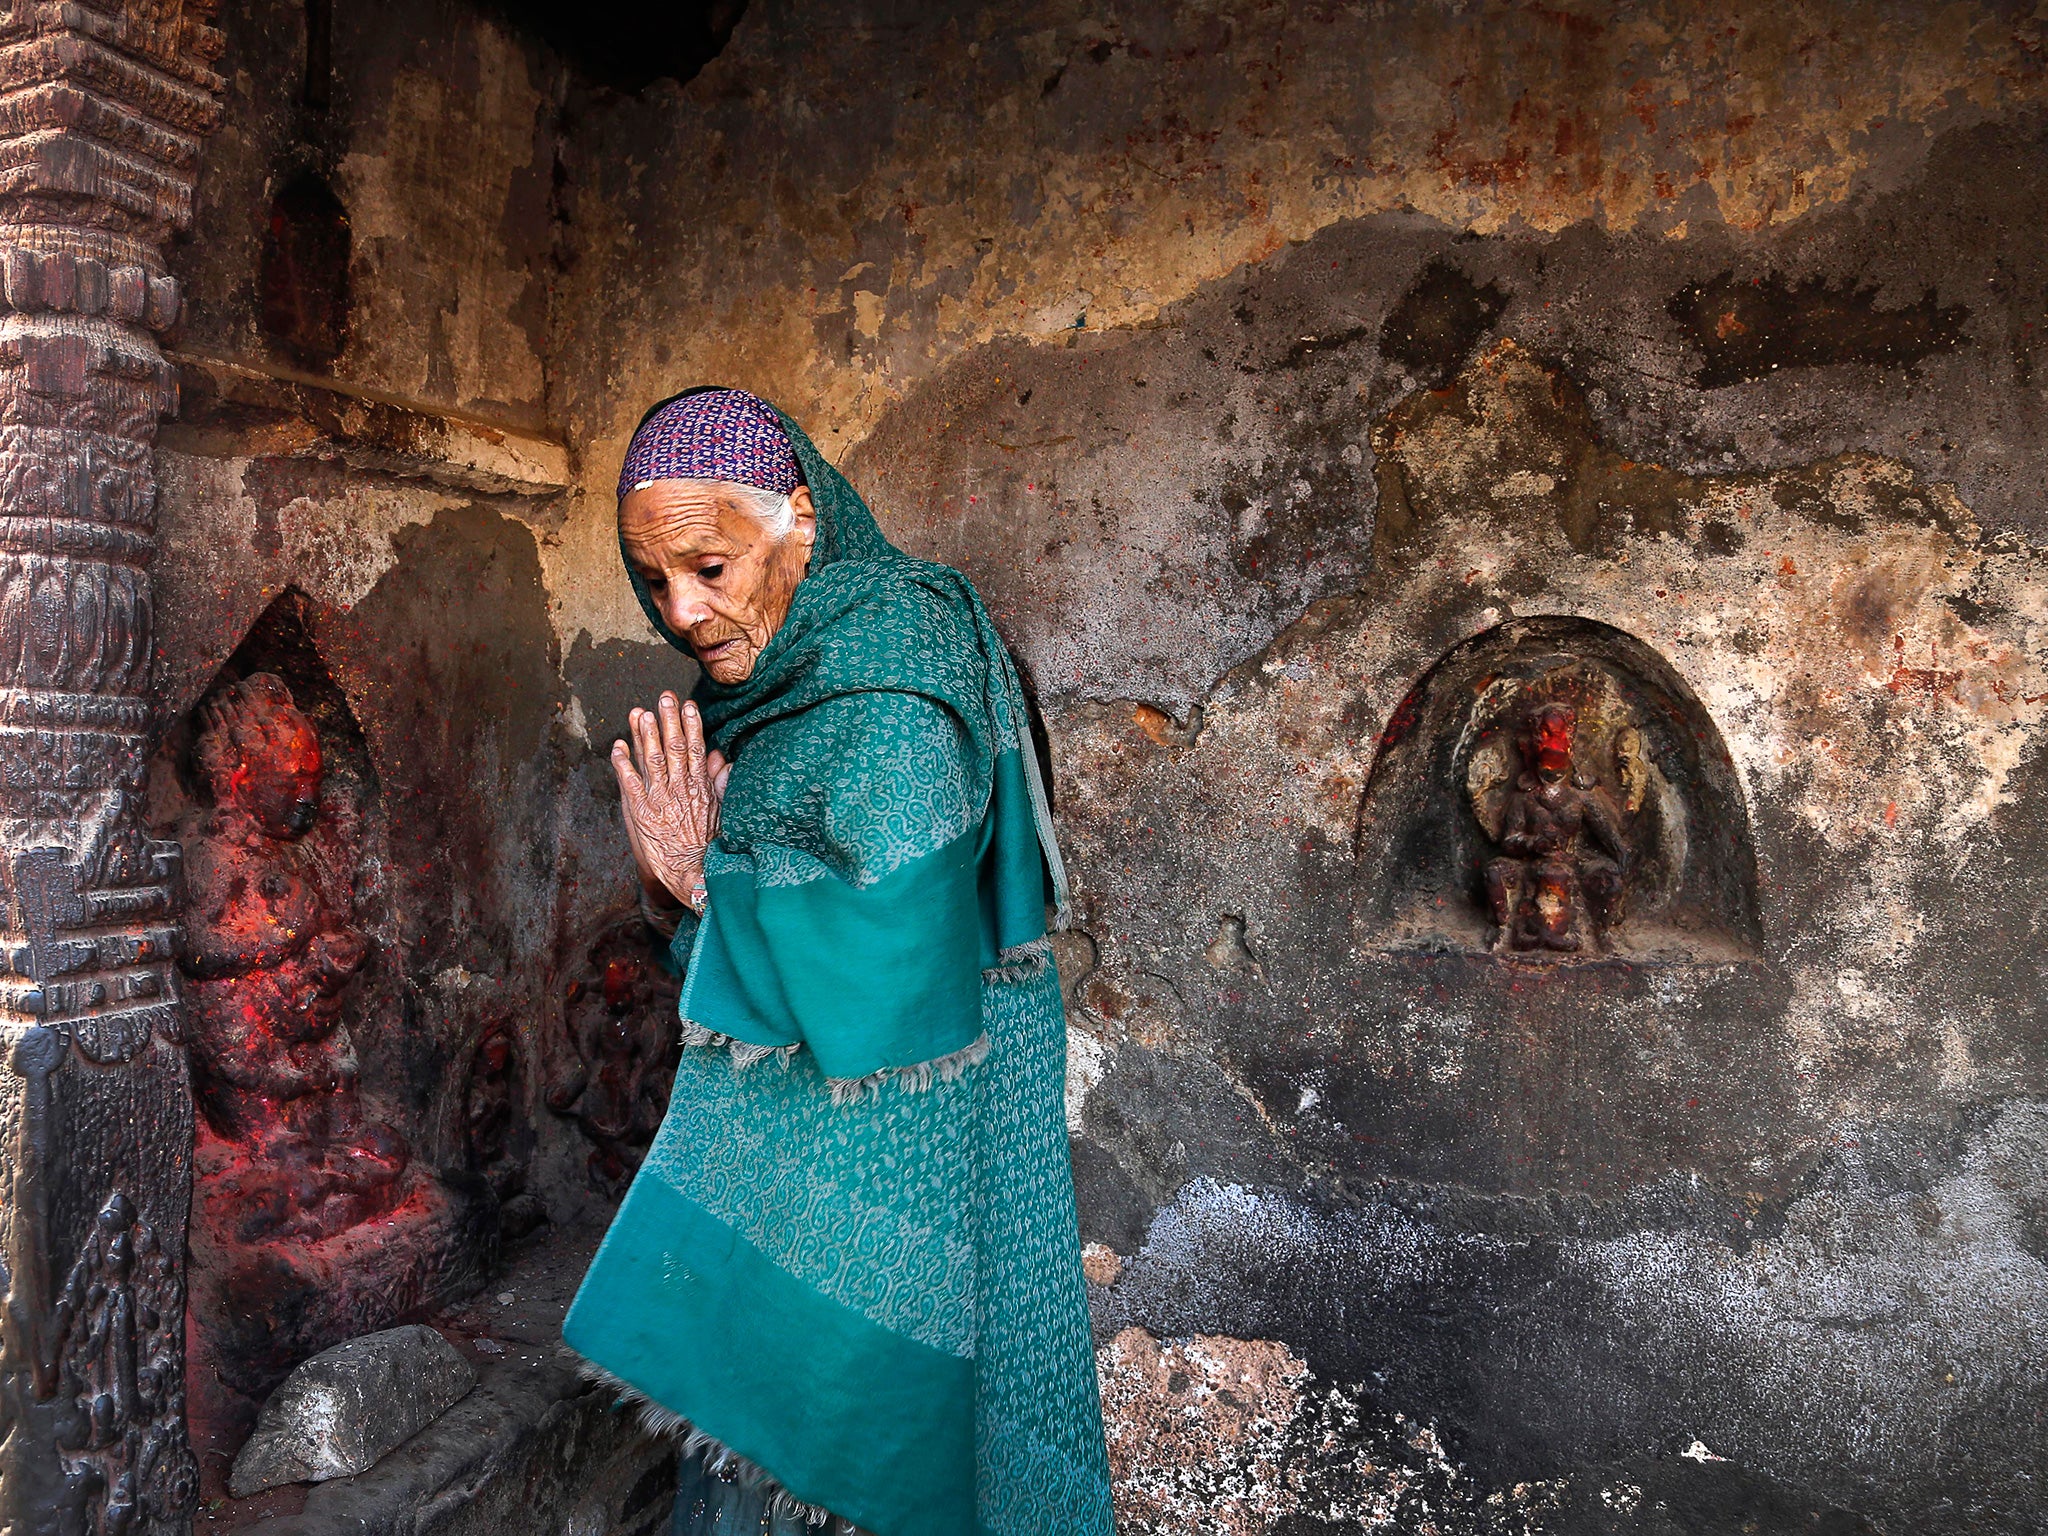 An elderly woman prays at a temple in Kathmandu damaged by the earthquake